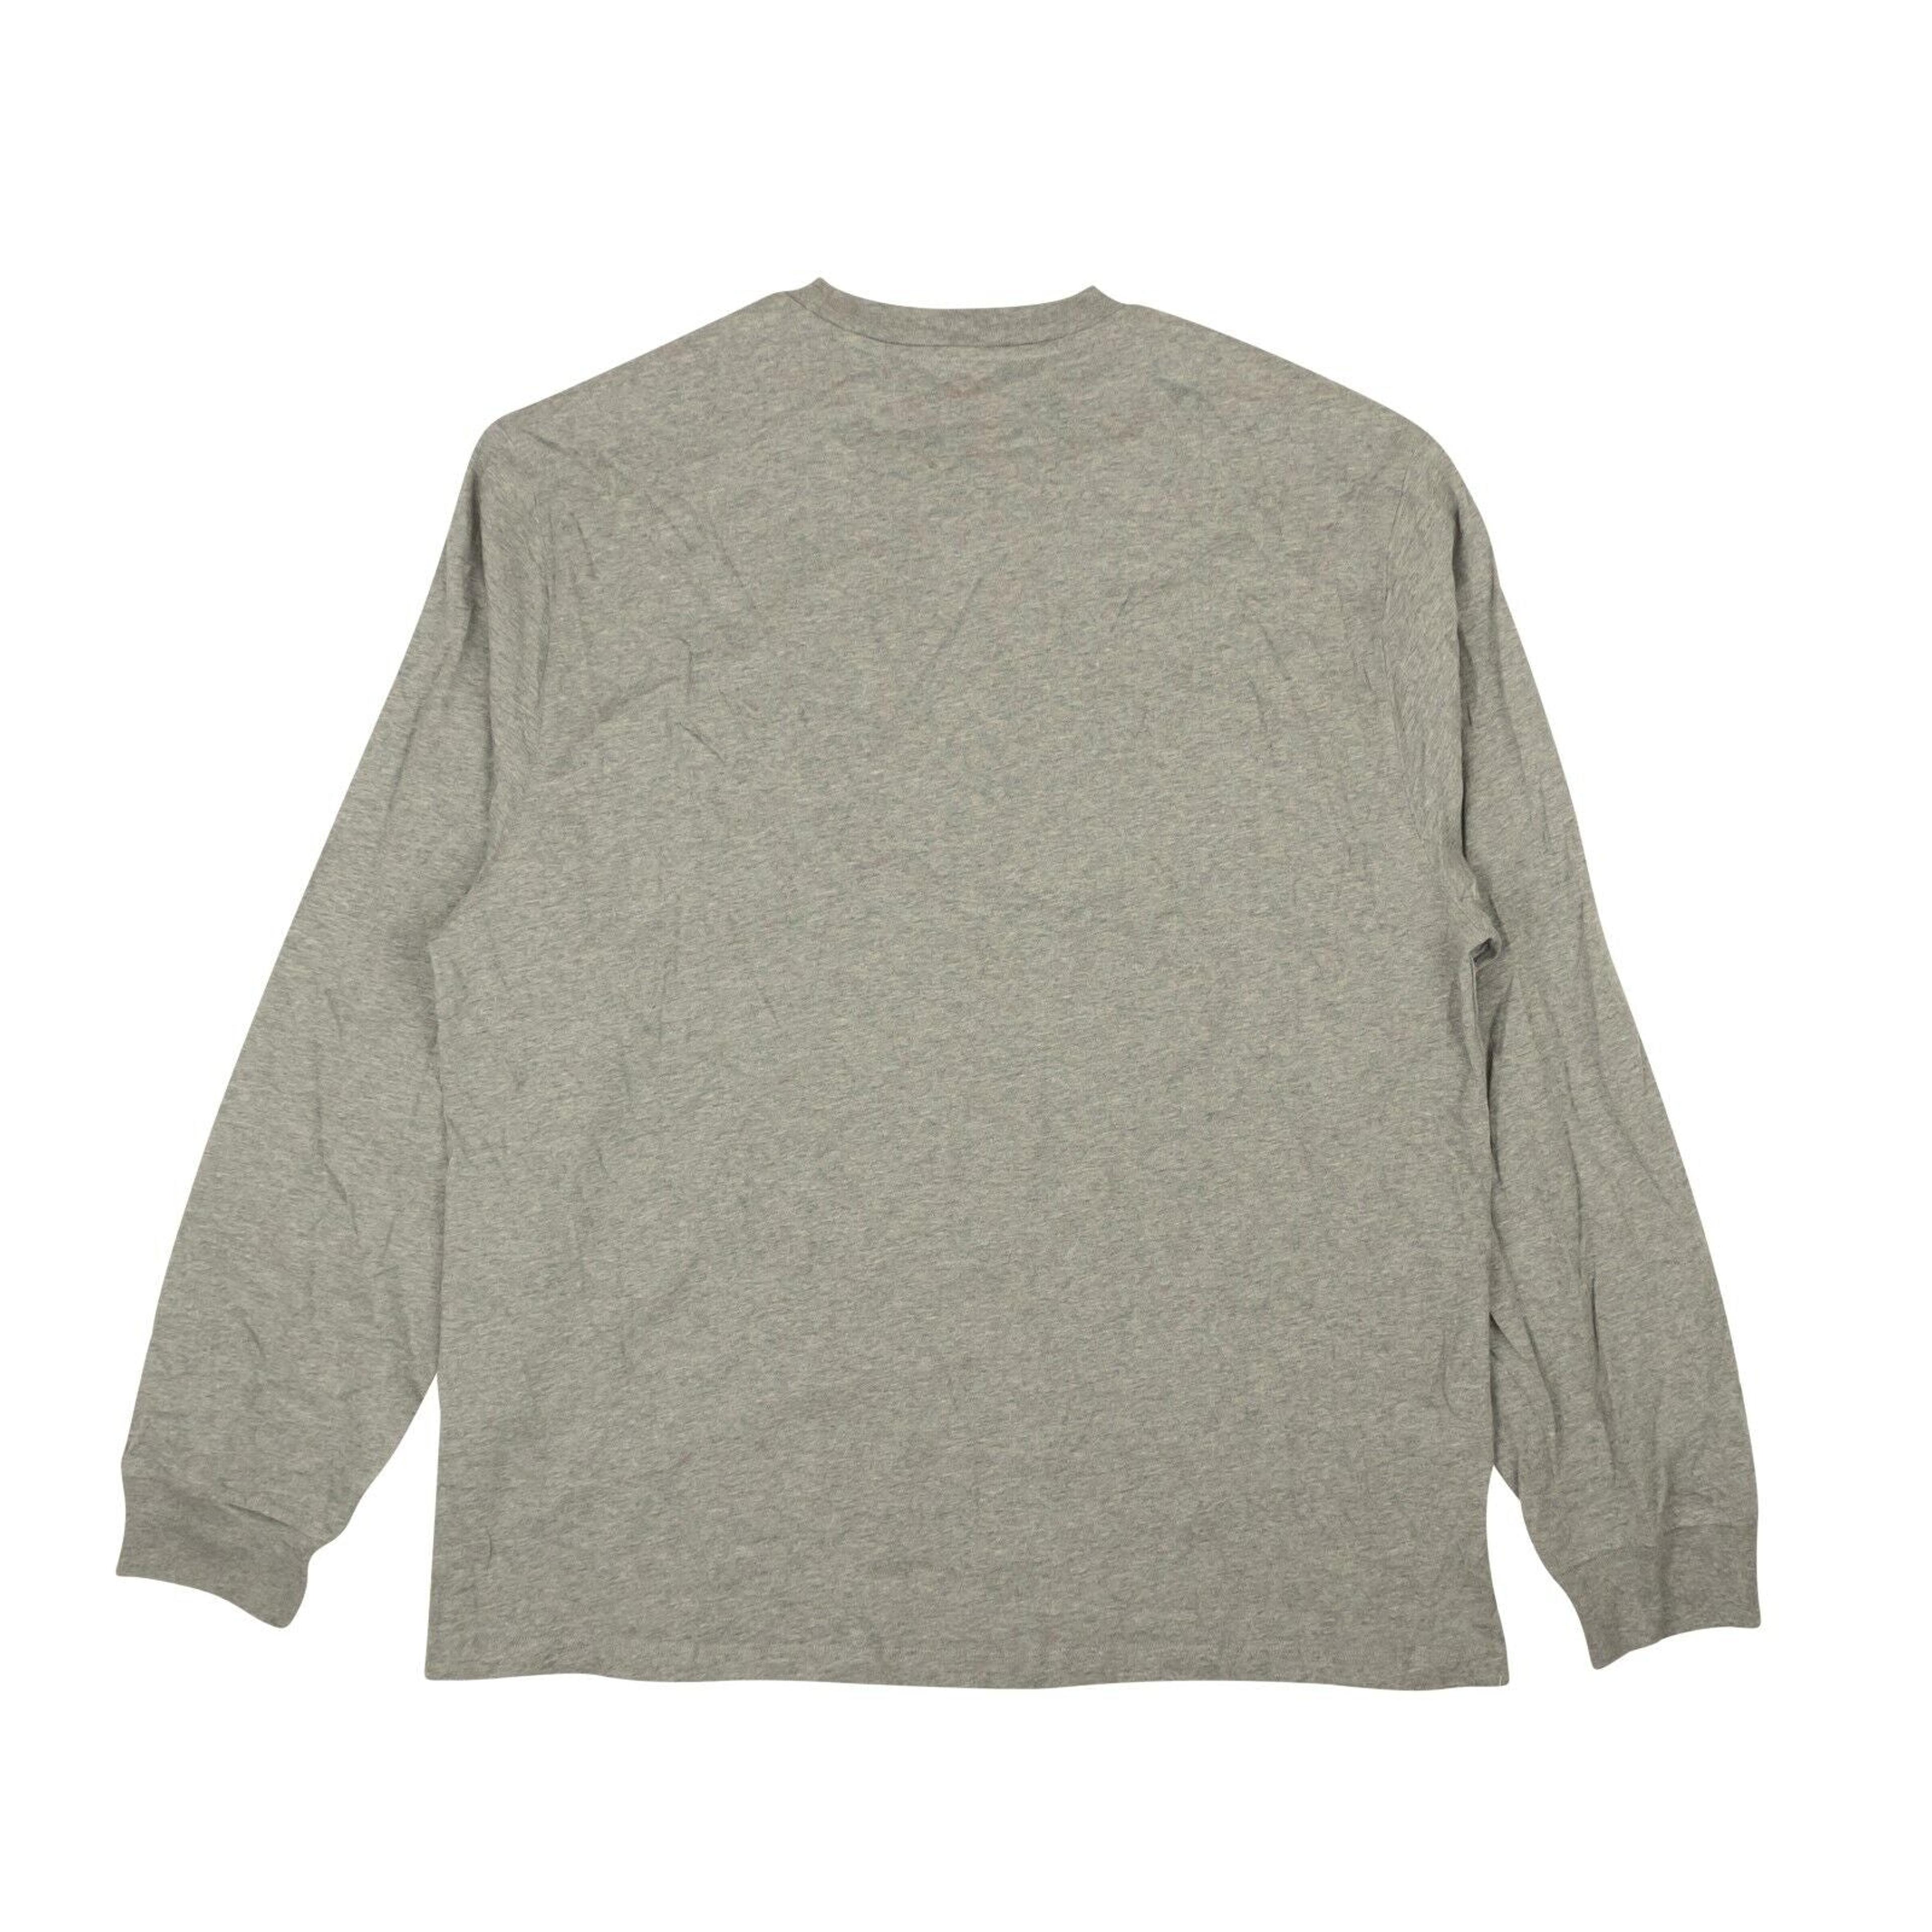 Alternate View 2 of Opening Ceremony Ls Graphic Logo Tee - Gray